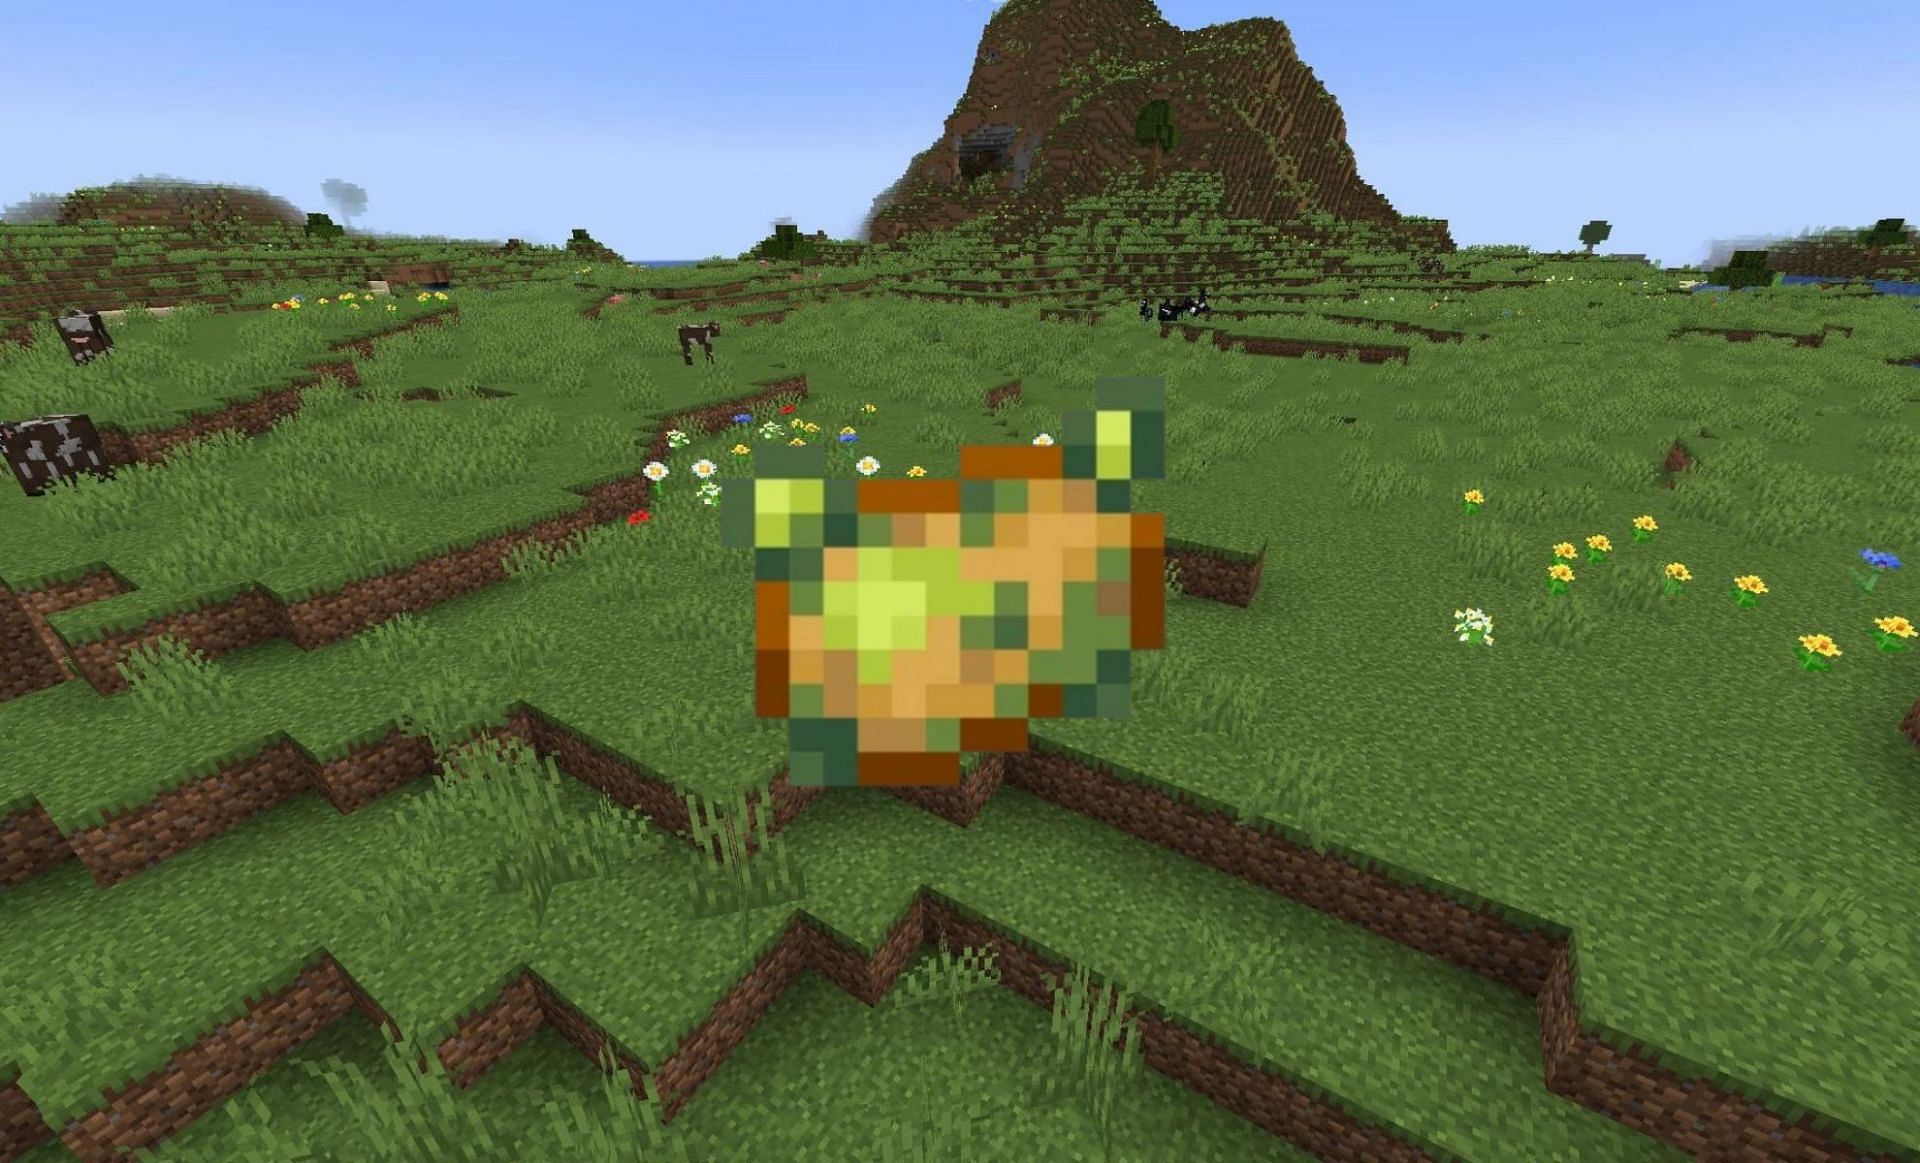 What are poisonous potatoes used for in Minecraft? (2022)